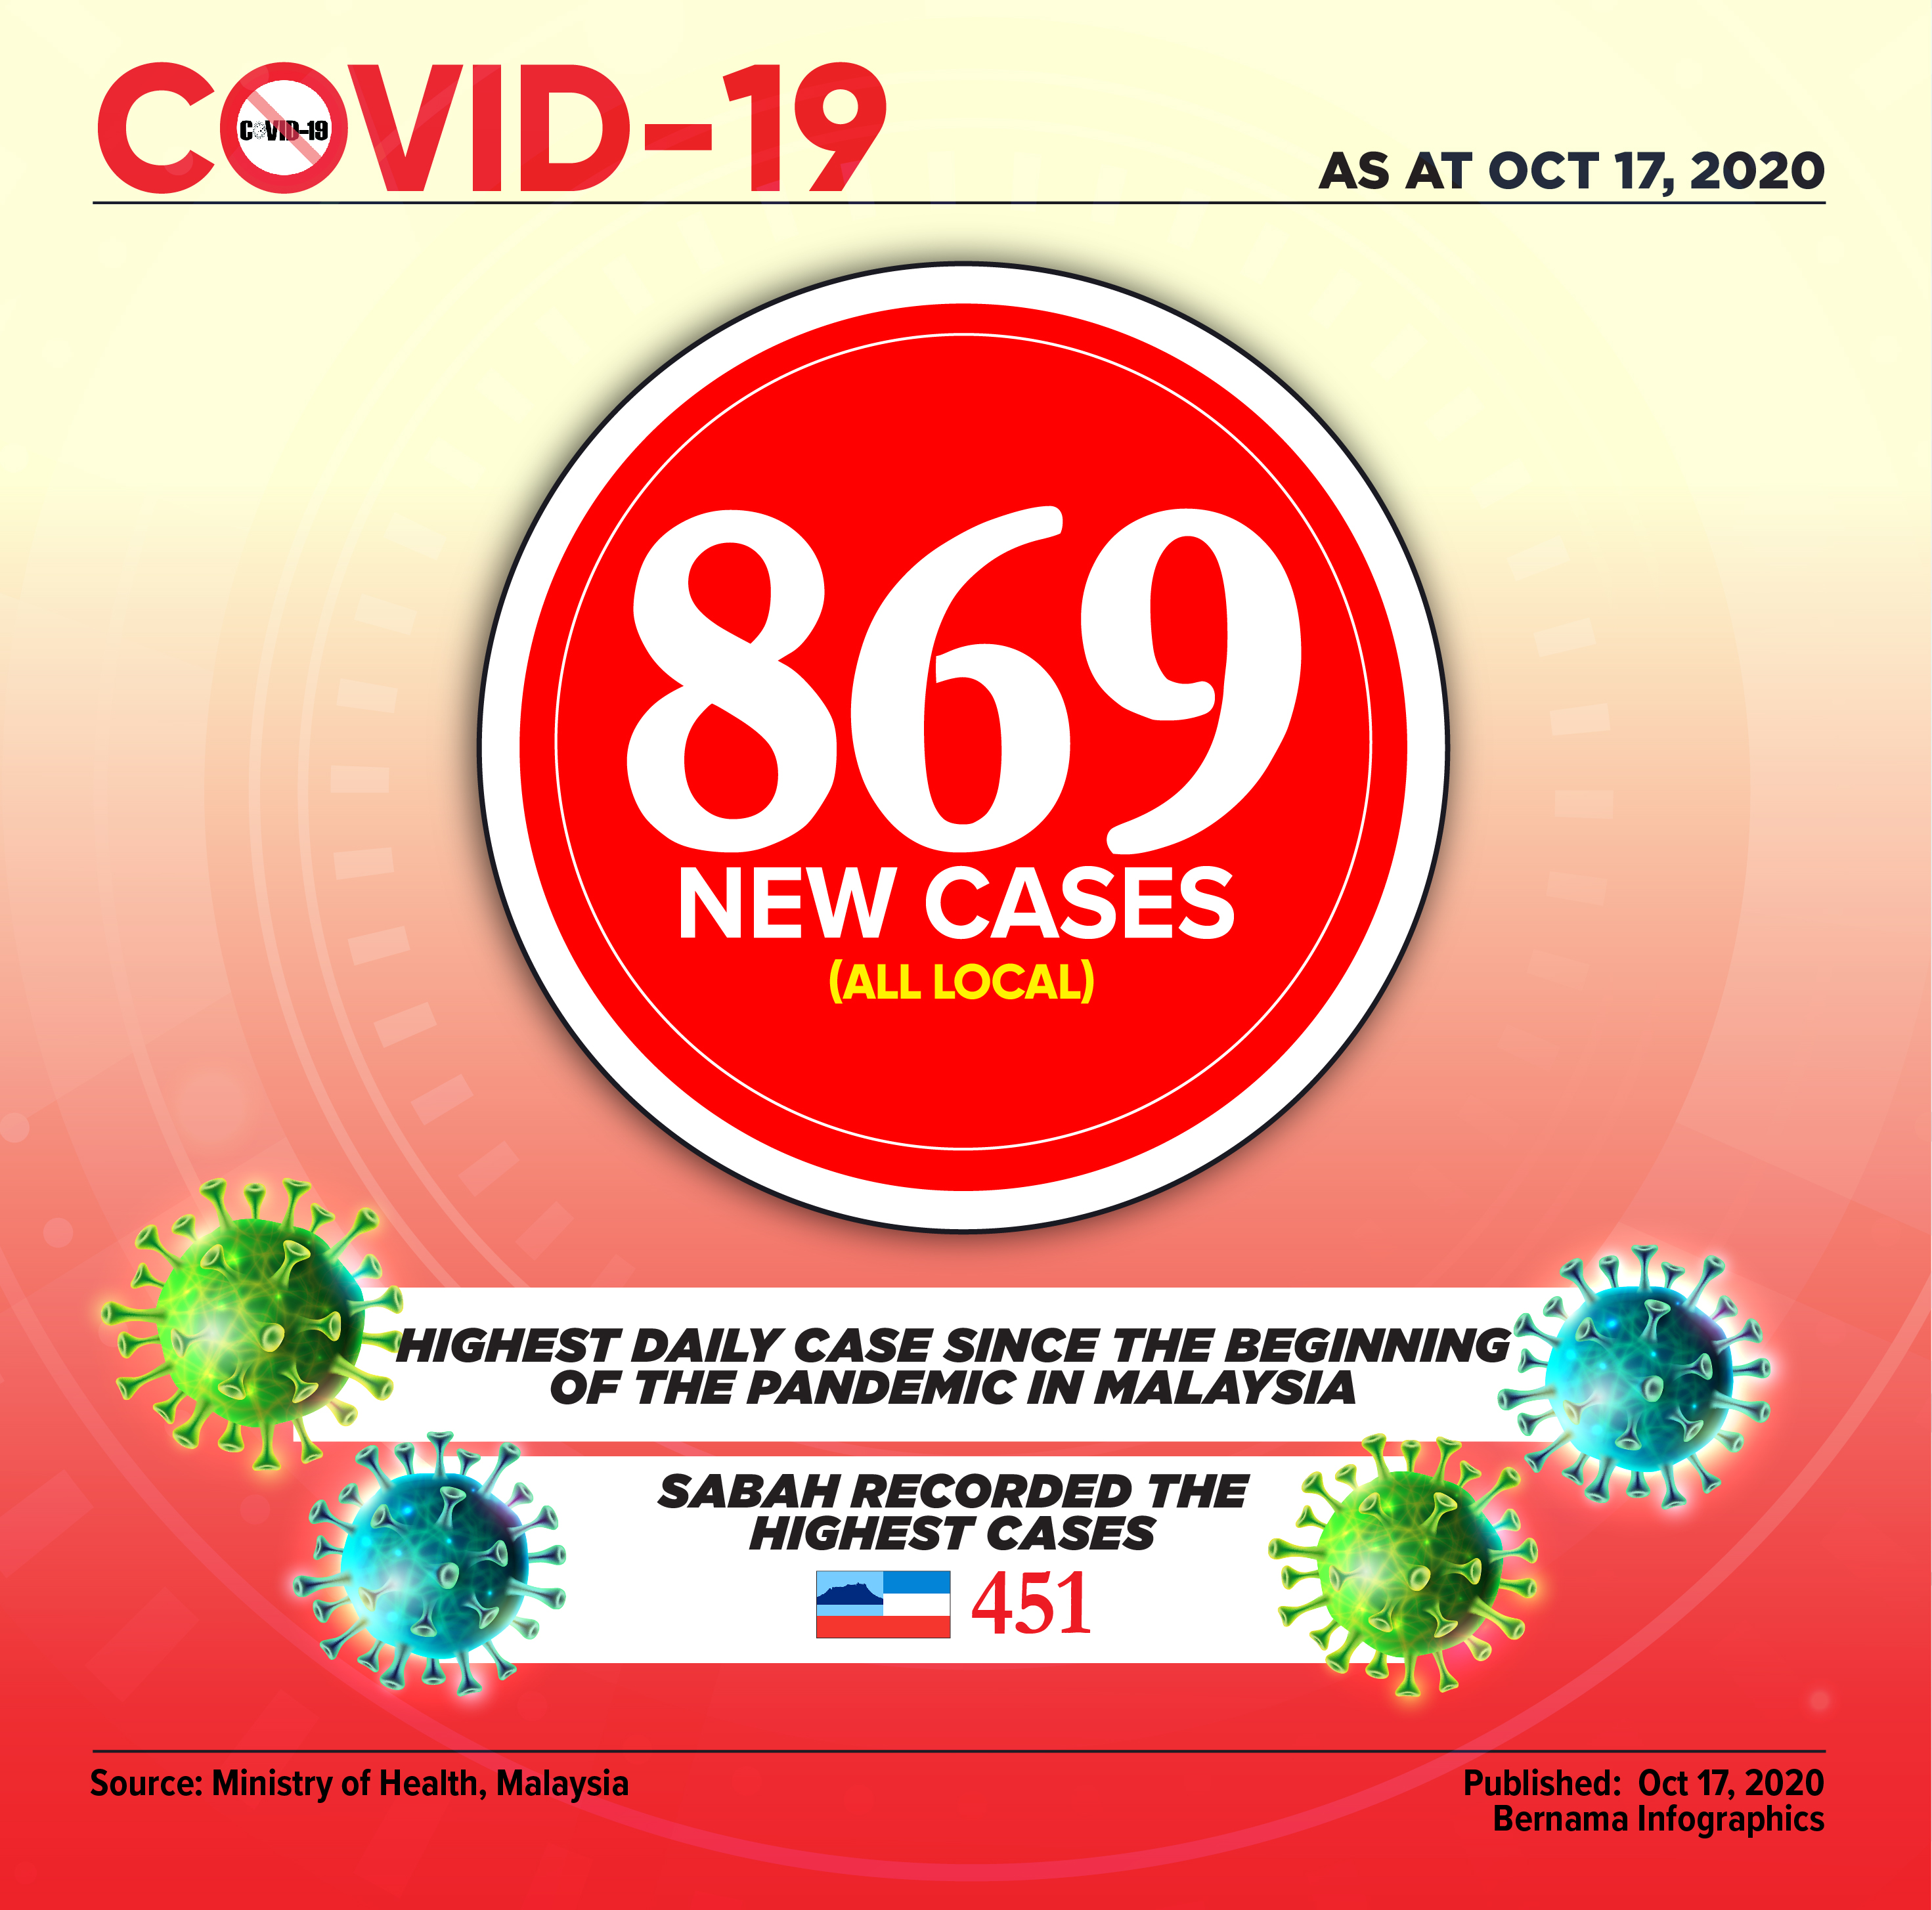 Malaysia sees highest jump in COVID-19 new cases at 869 since start of pandemic